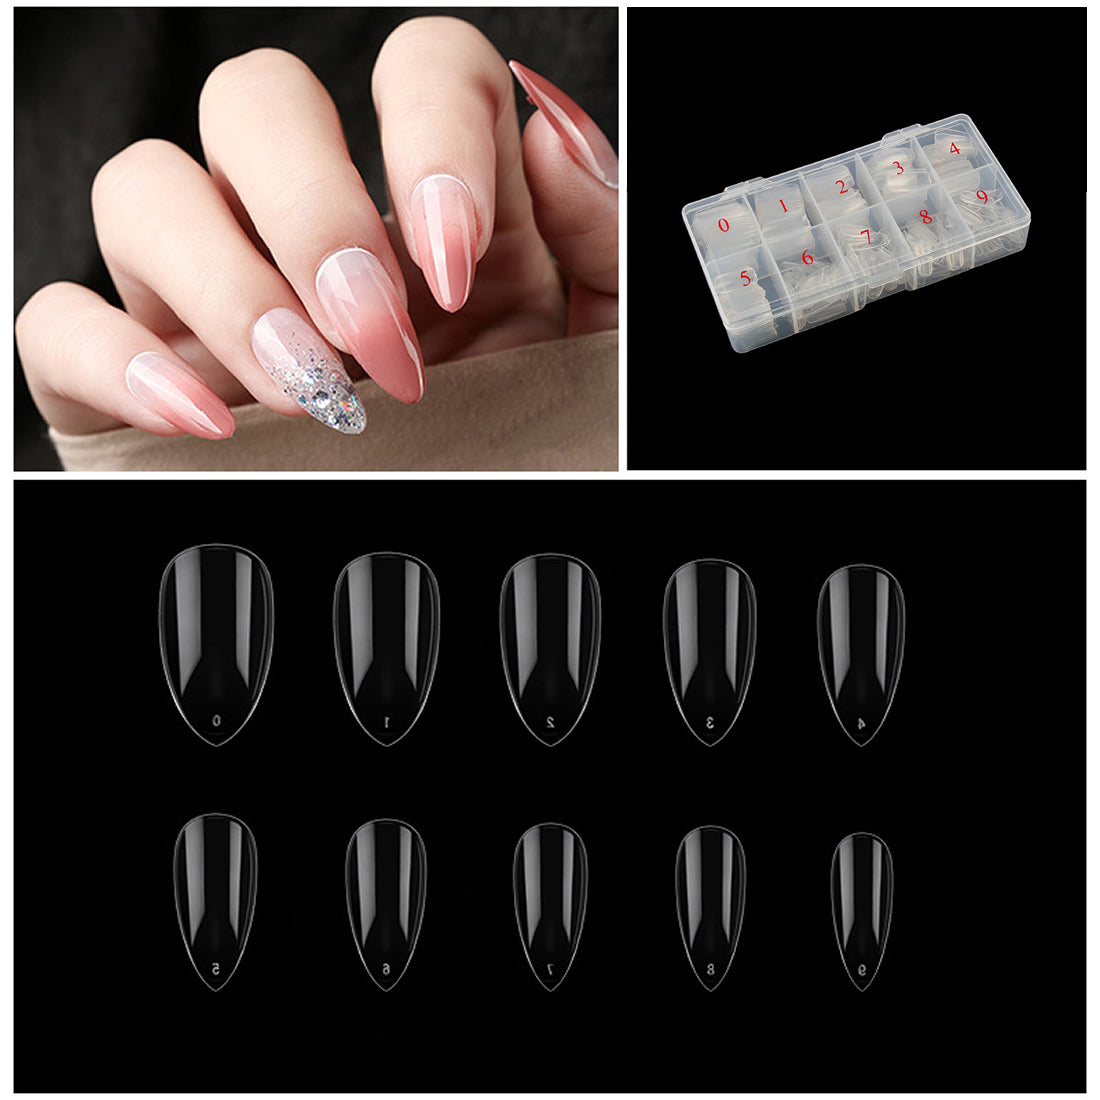 Herrlich 100 Pcs Artificial Nails With Nail Glue Transparent Transparent  TRANSPARENT - Price in India, Buy Herrlich 100 Pcs Artificial Nails With  Nail Glue Transparent Transparent TRANSPARENT Online In India, Reviews,  Ratings